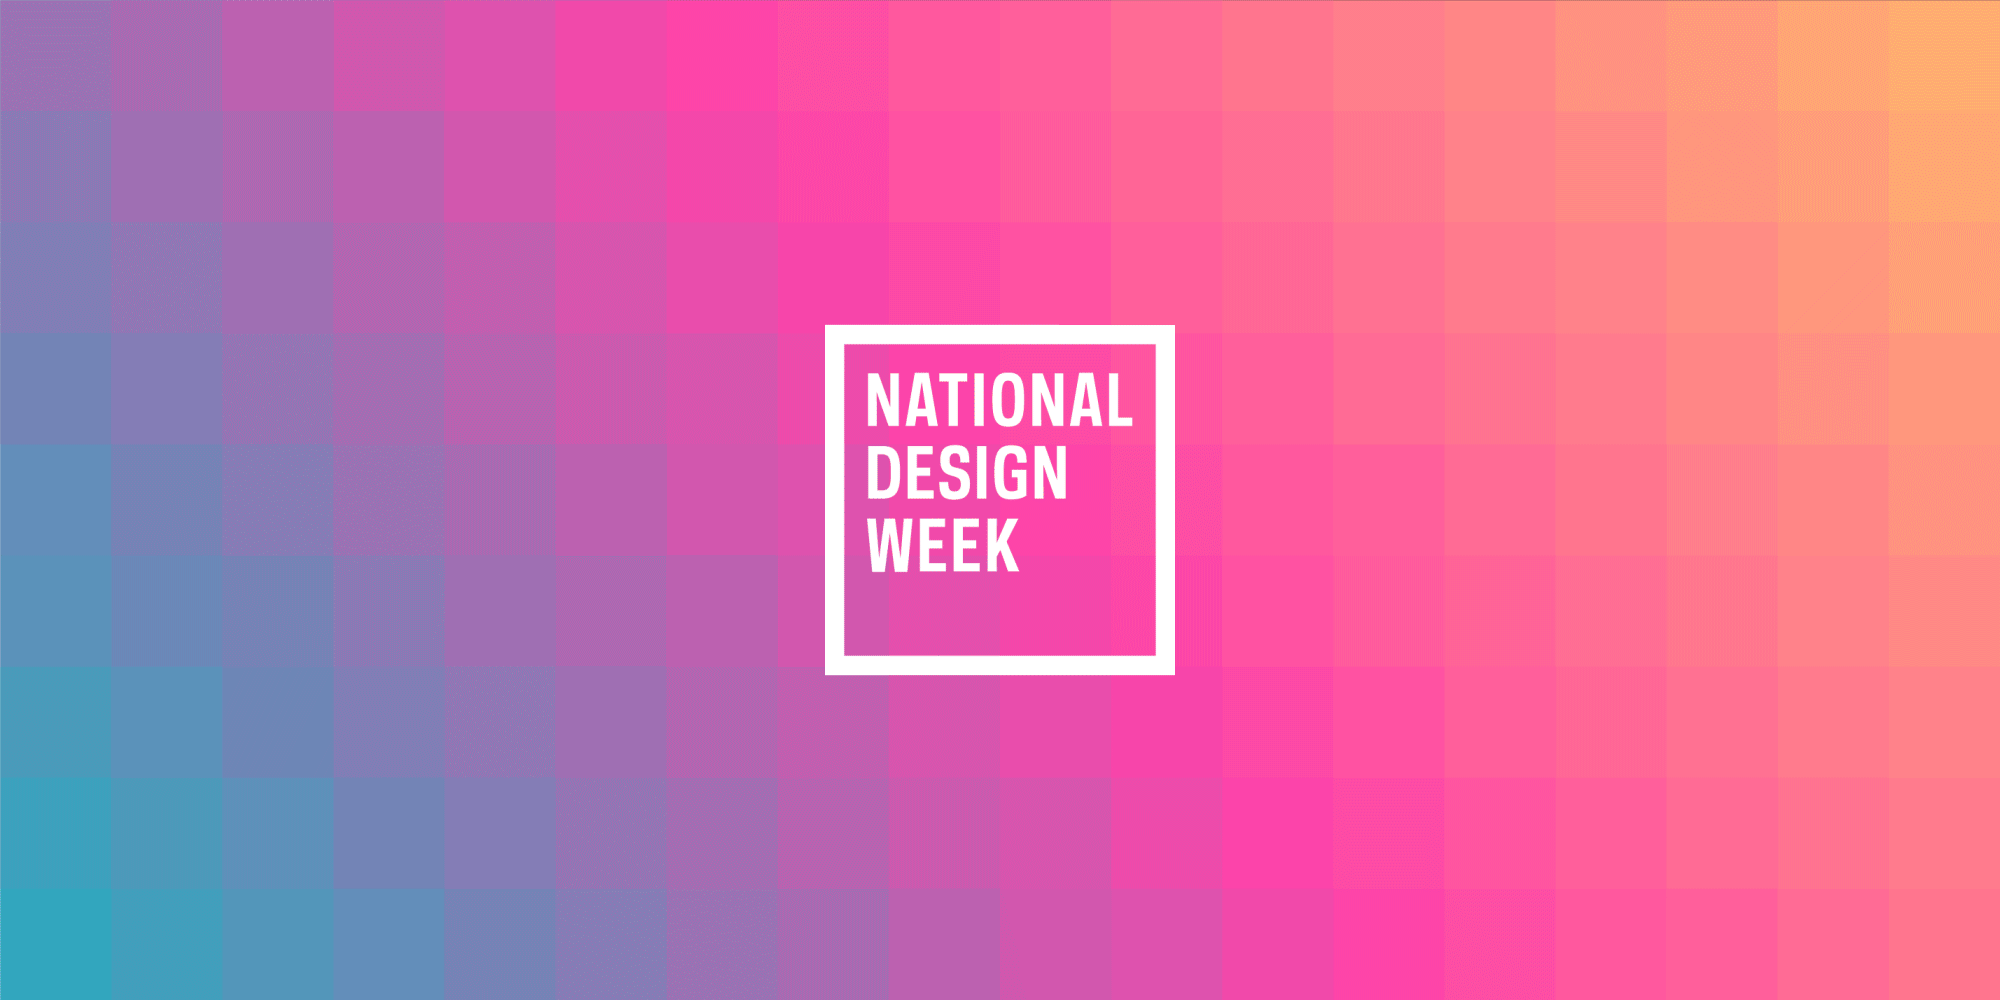 The words "National Design Week" appear in white on a multi-colored gradient background.